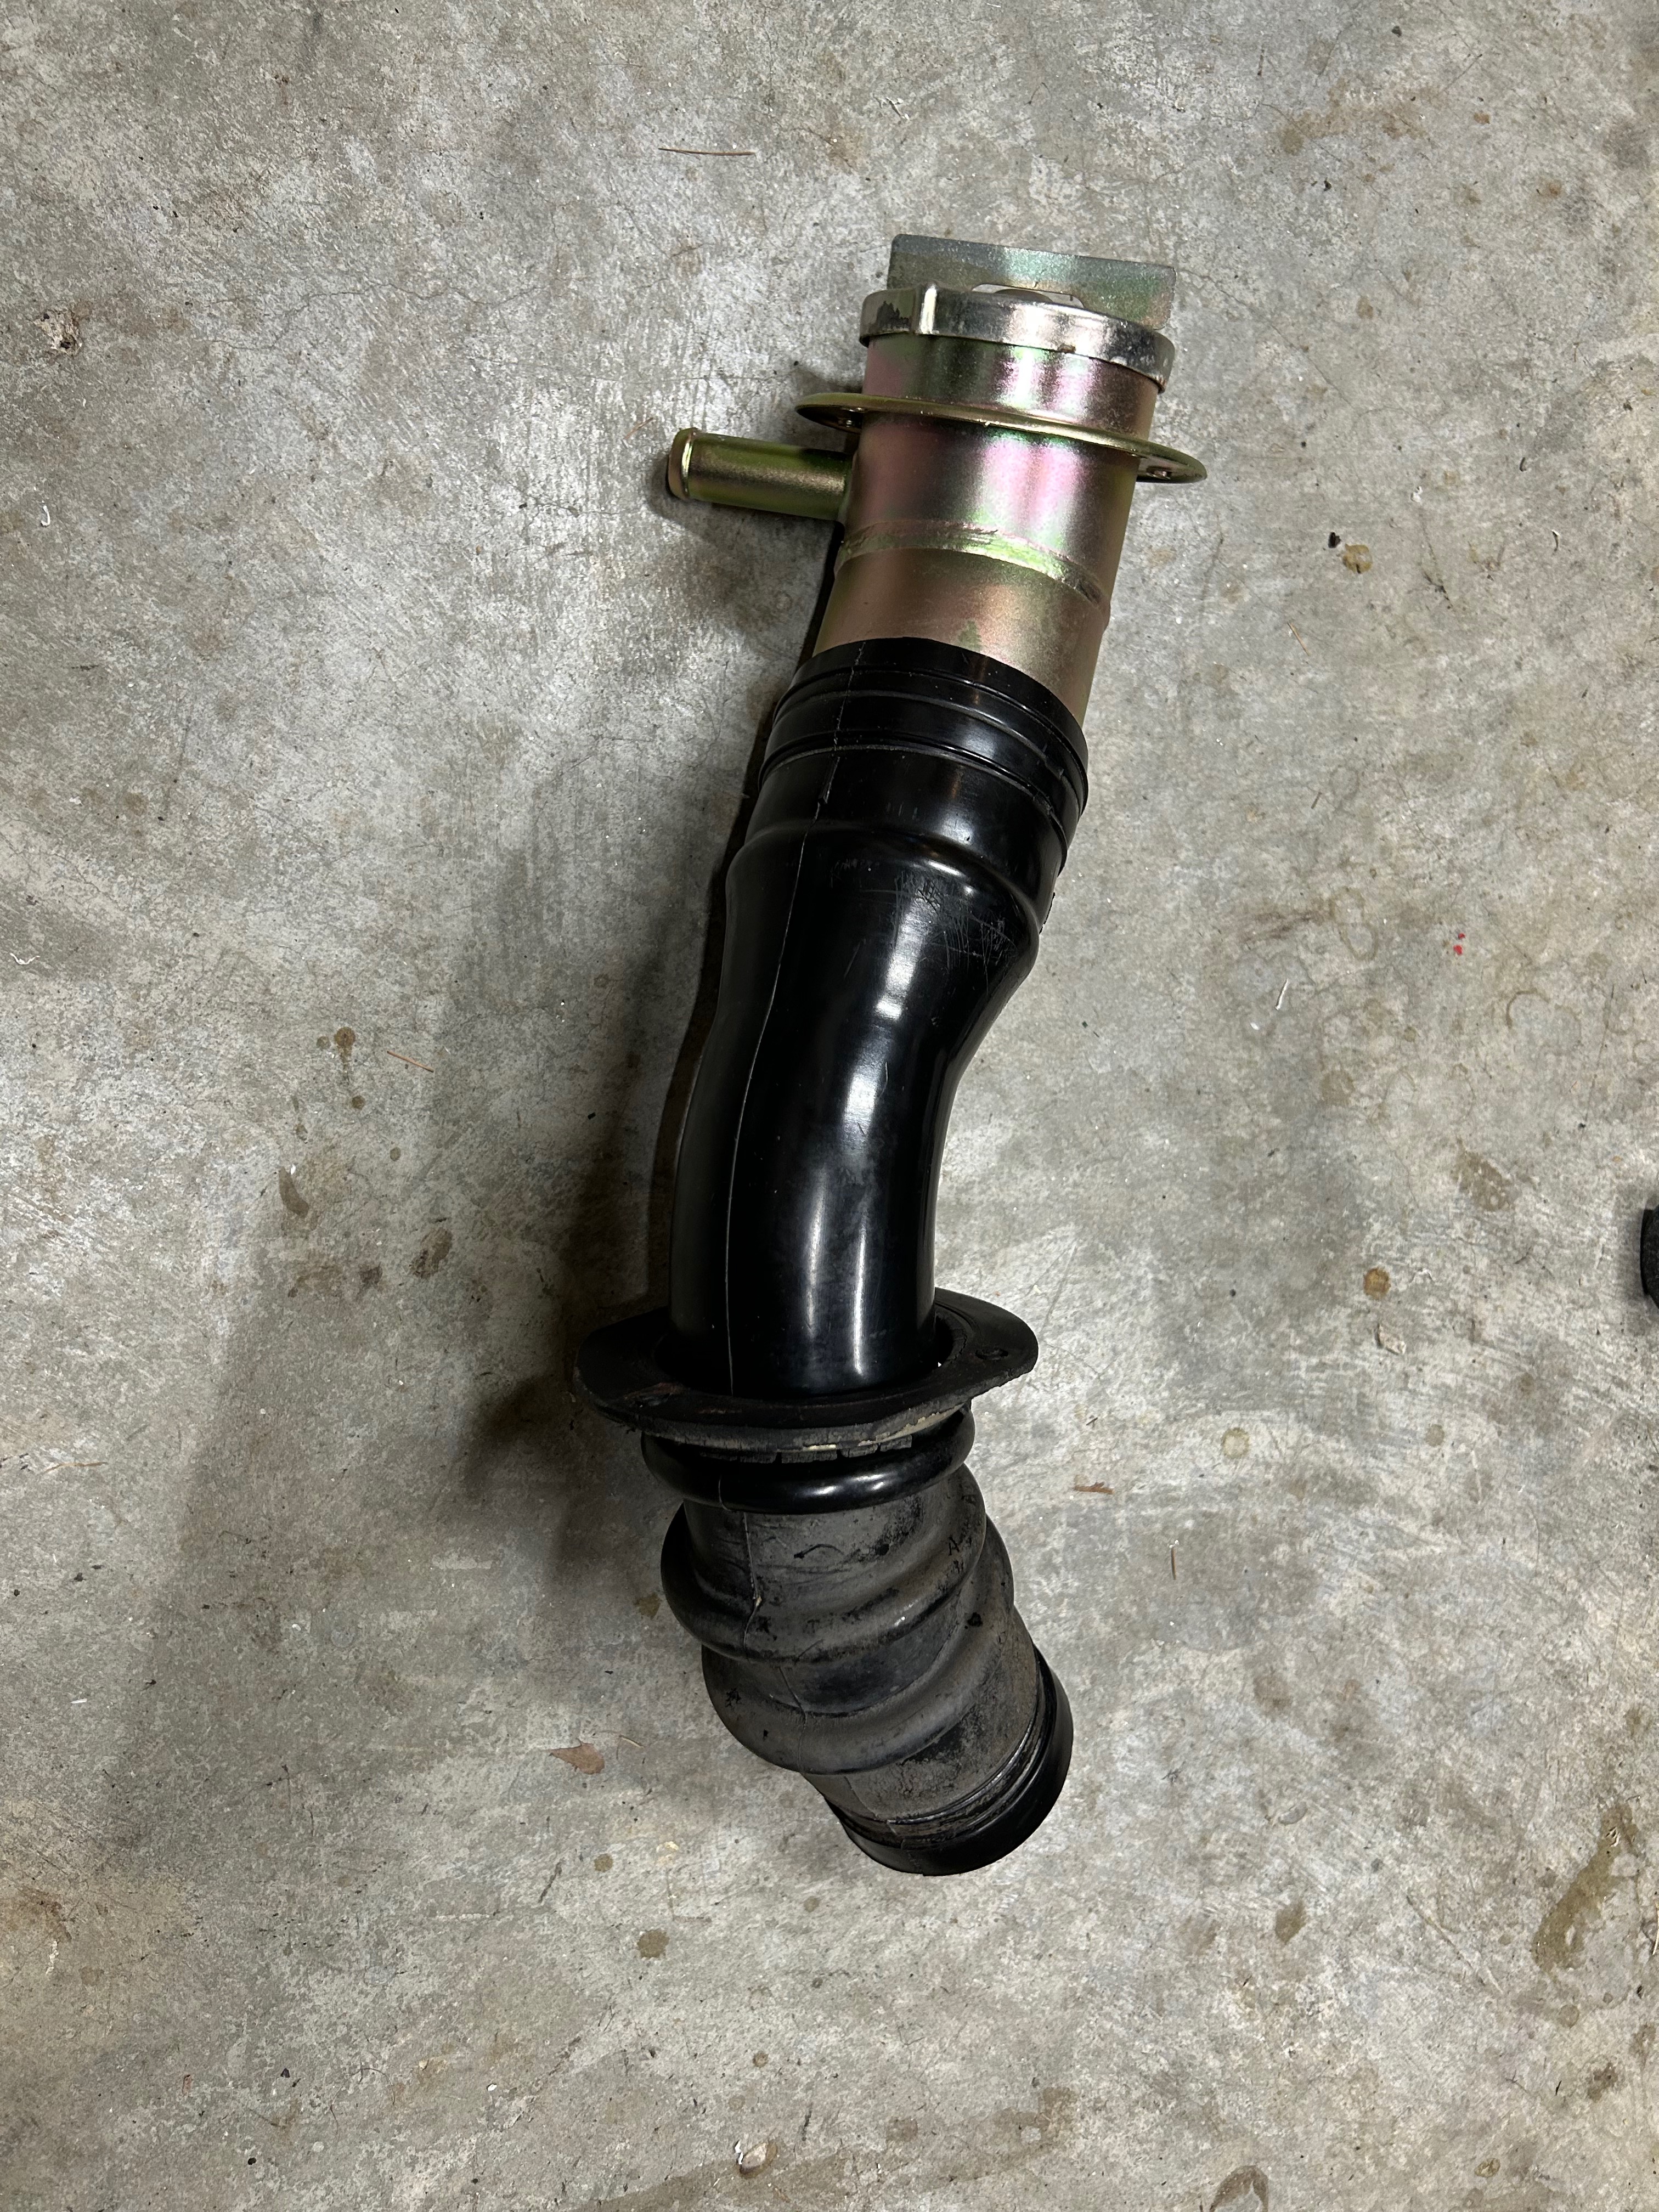 Late 260/280 gas filler neck and cap